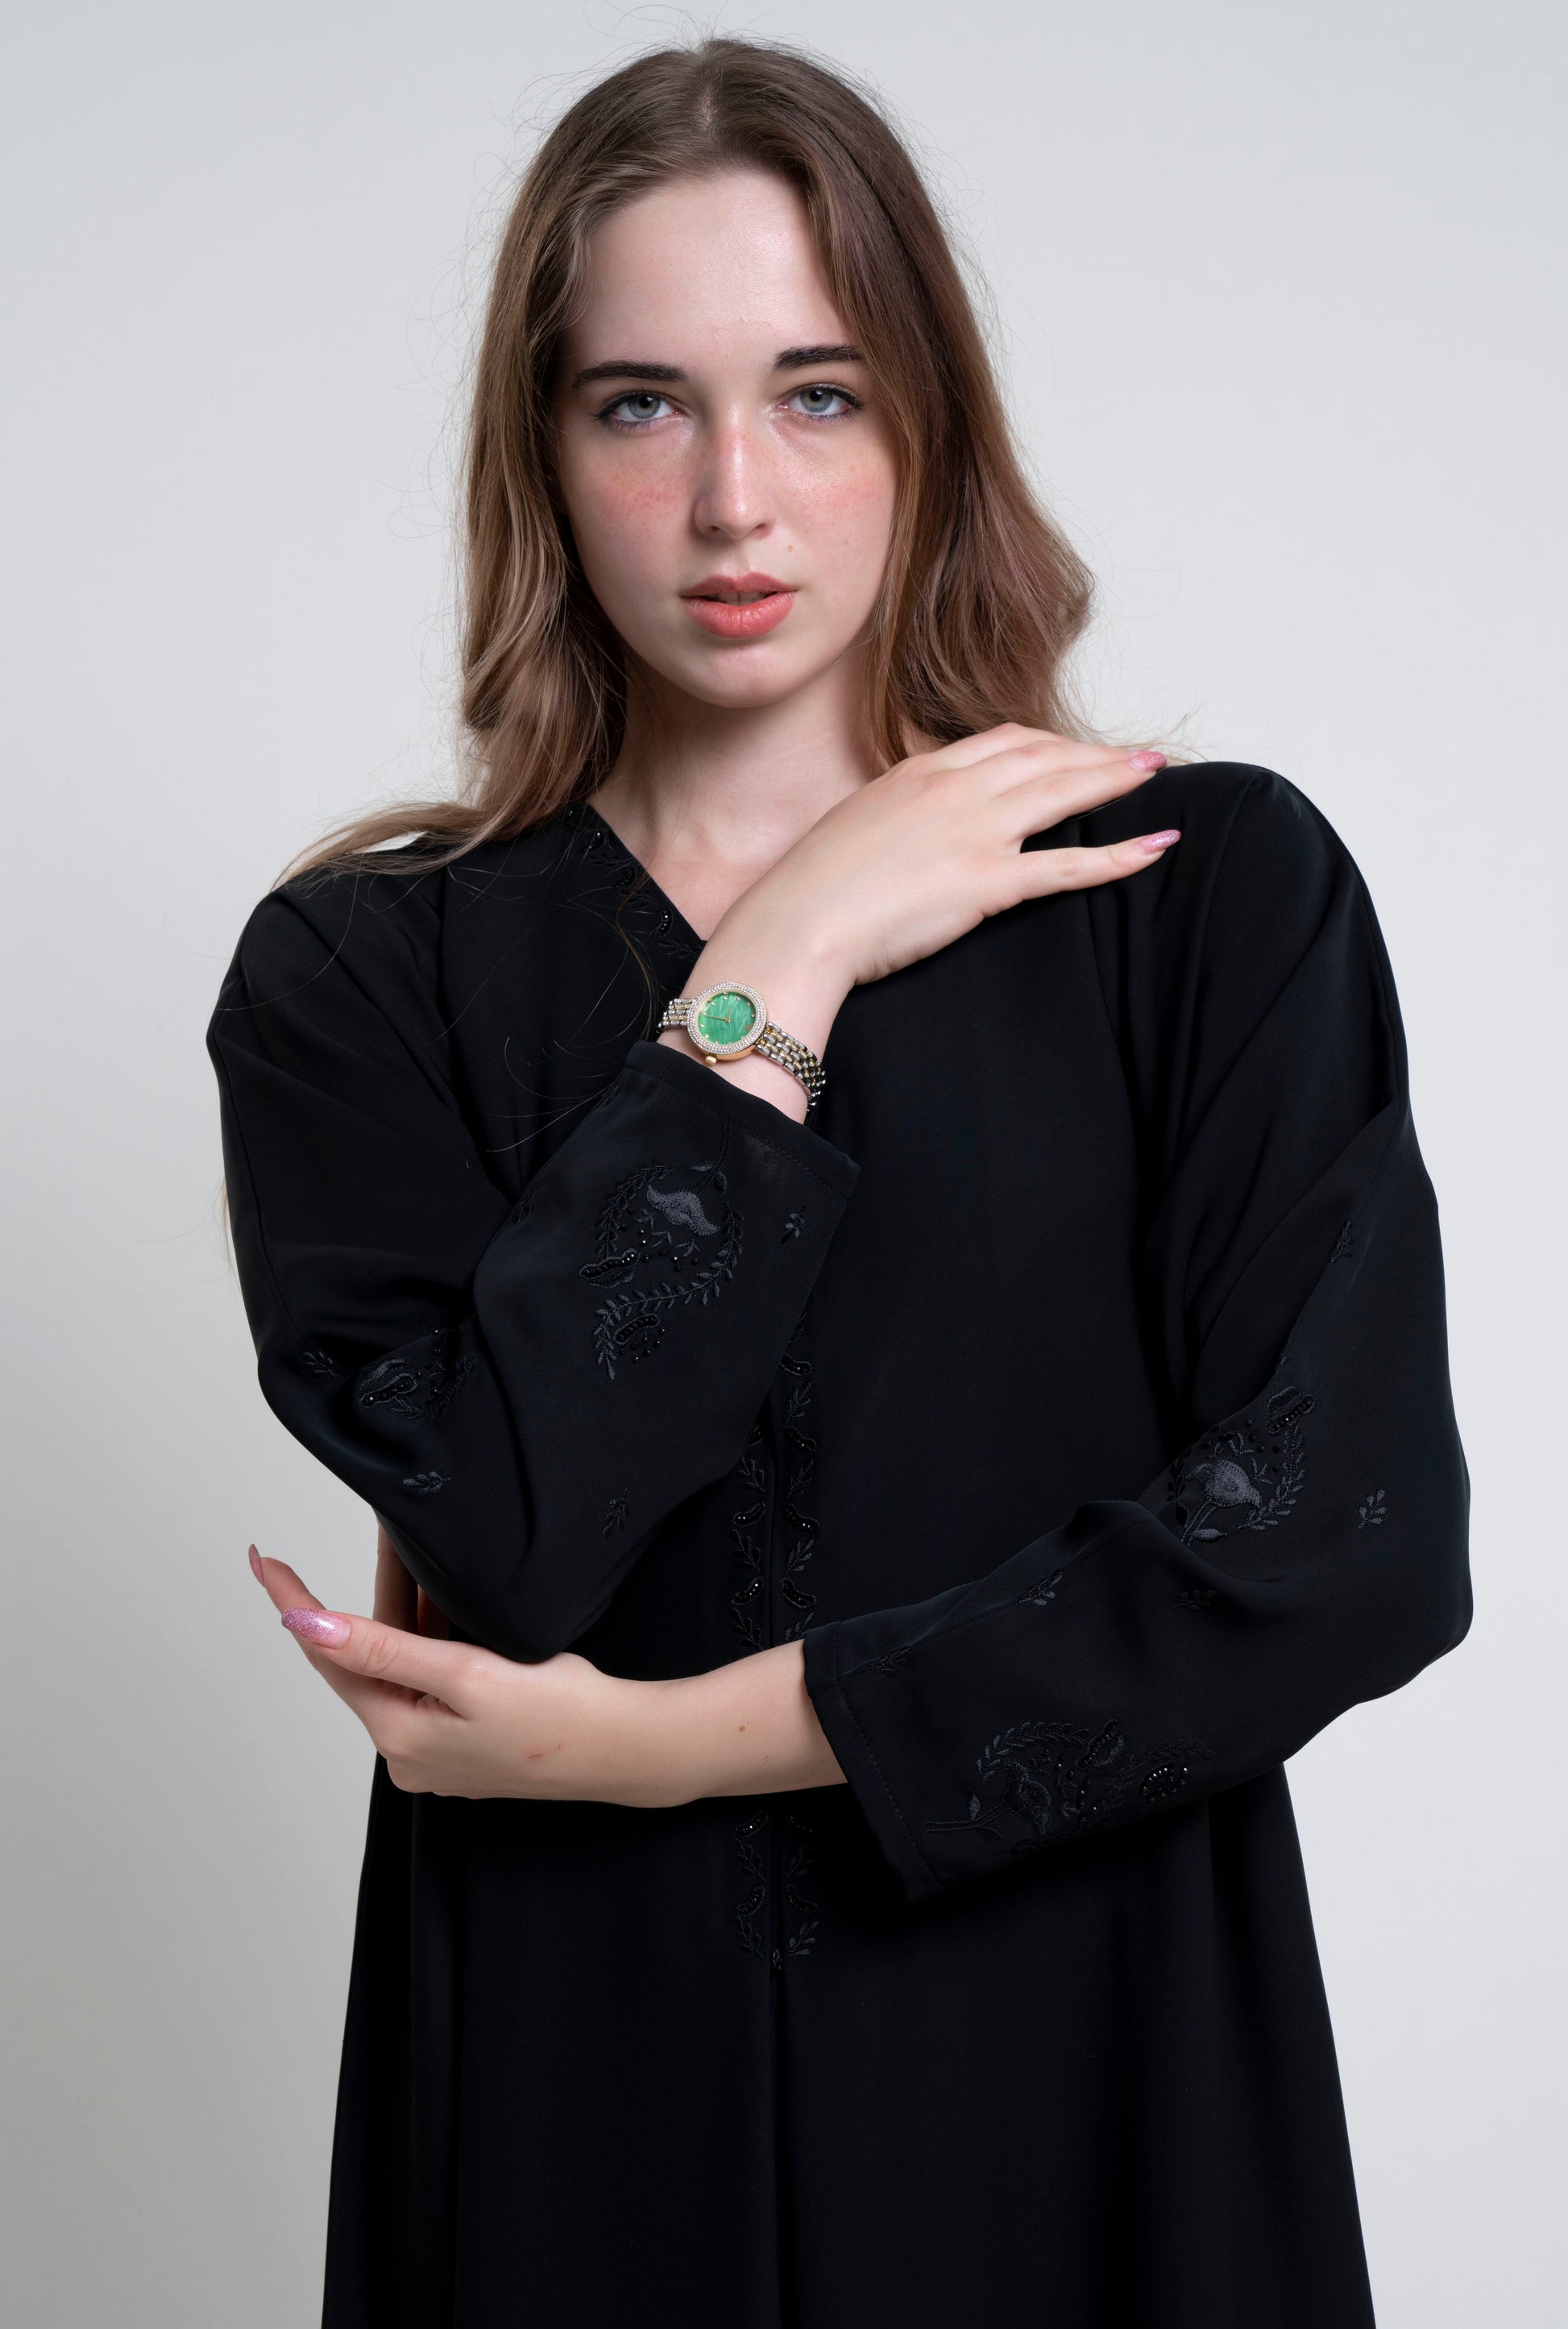 Girl wearing black abaya design with Embroidered Neckline and Floral Motif Sleeves